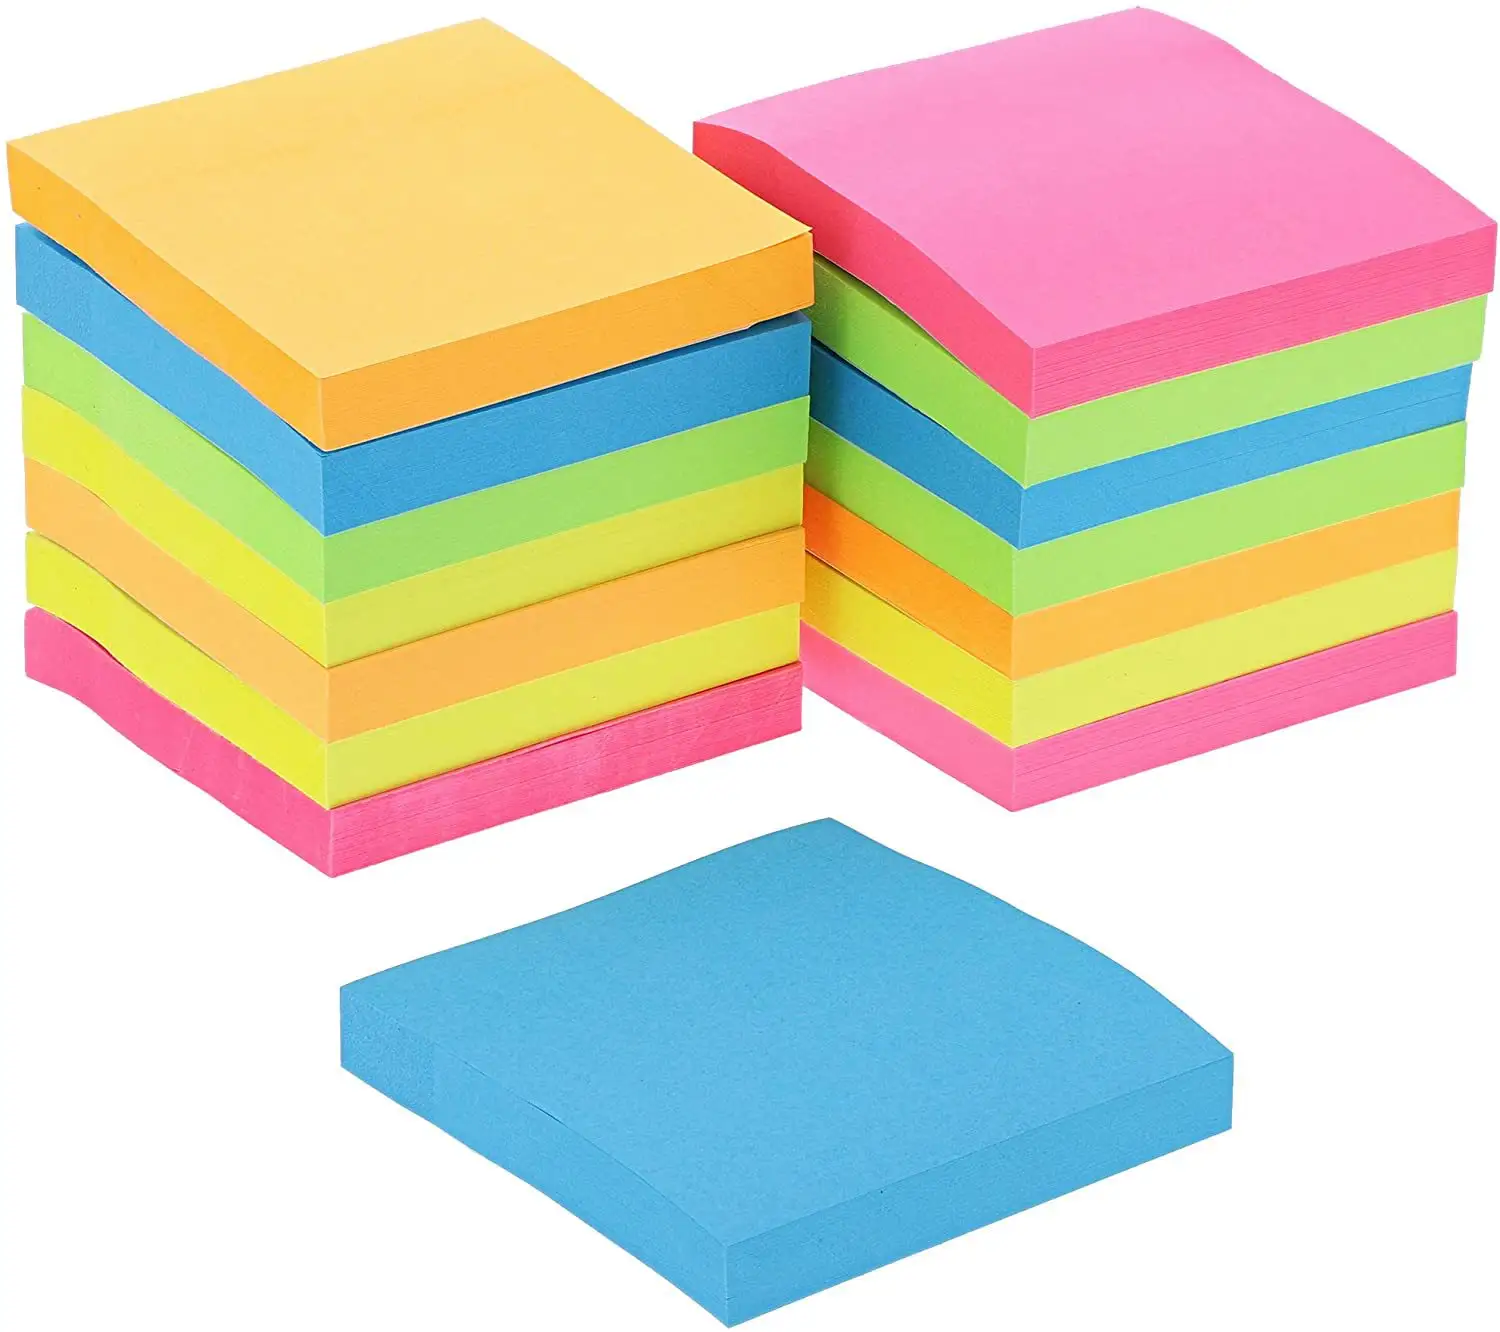 Sticky Notes 3 x 3 inch Post Bright Sticky Colorful Super Sticking Power Memo Pads, Strong Adhesive